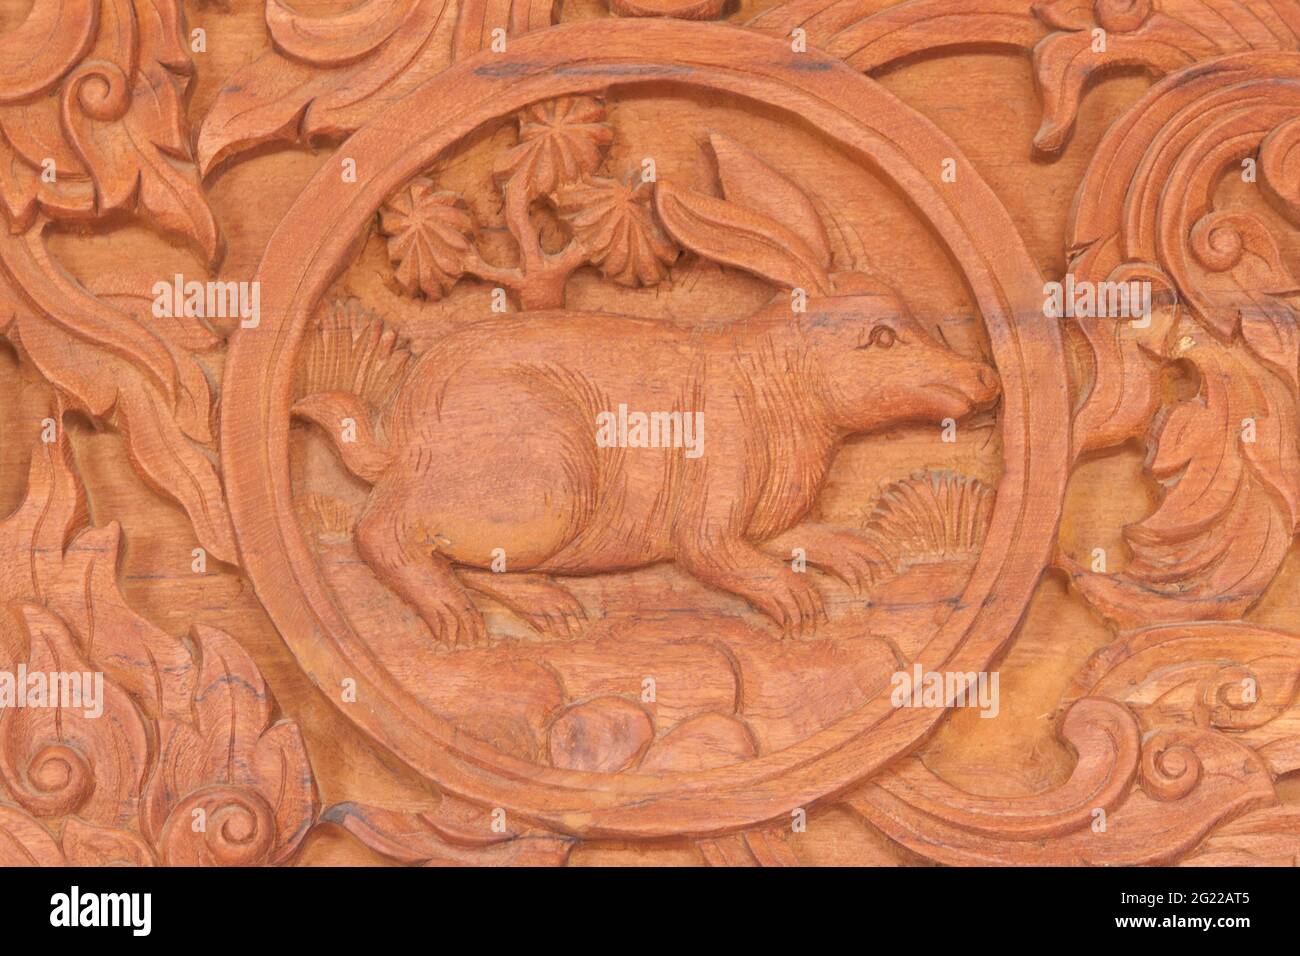 Wood carving of rabbit Chinese zodiac animal sign Stock Photo